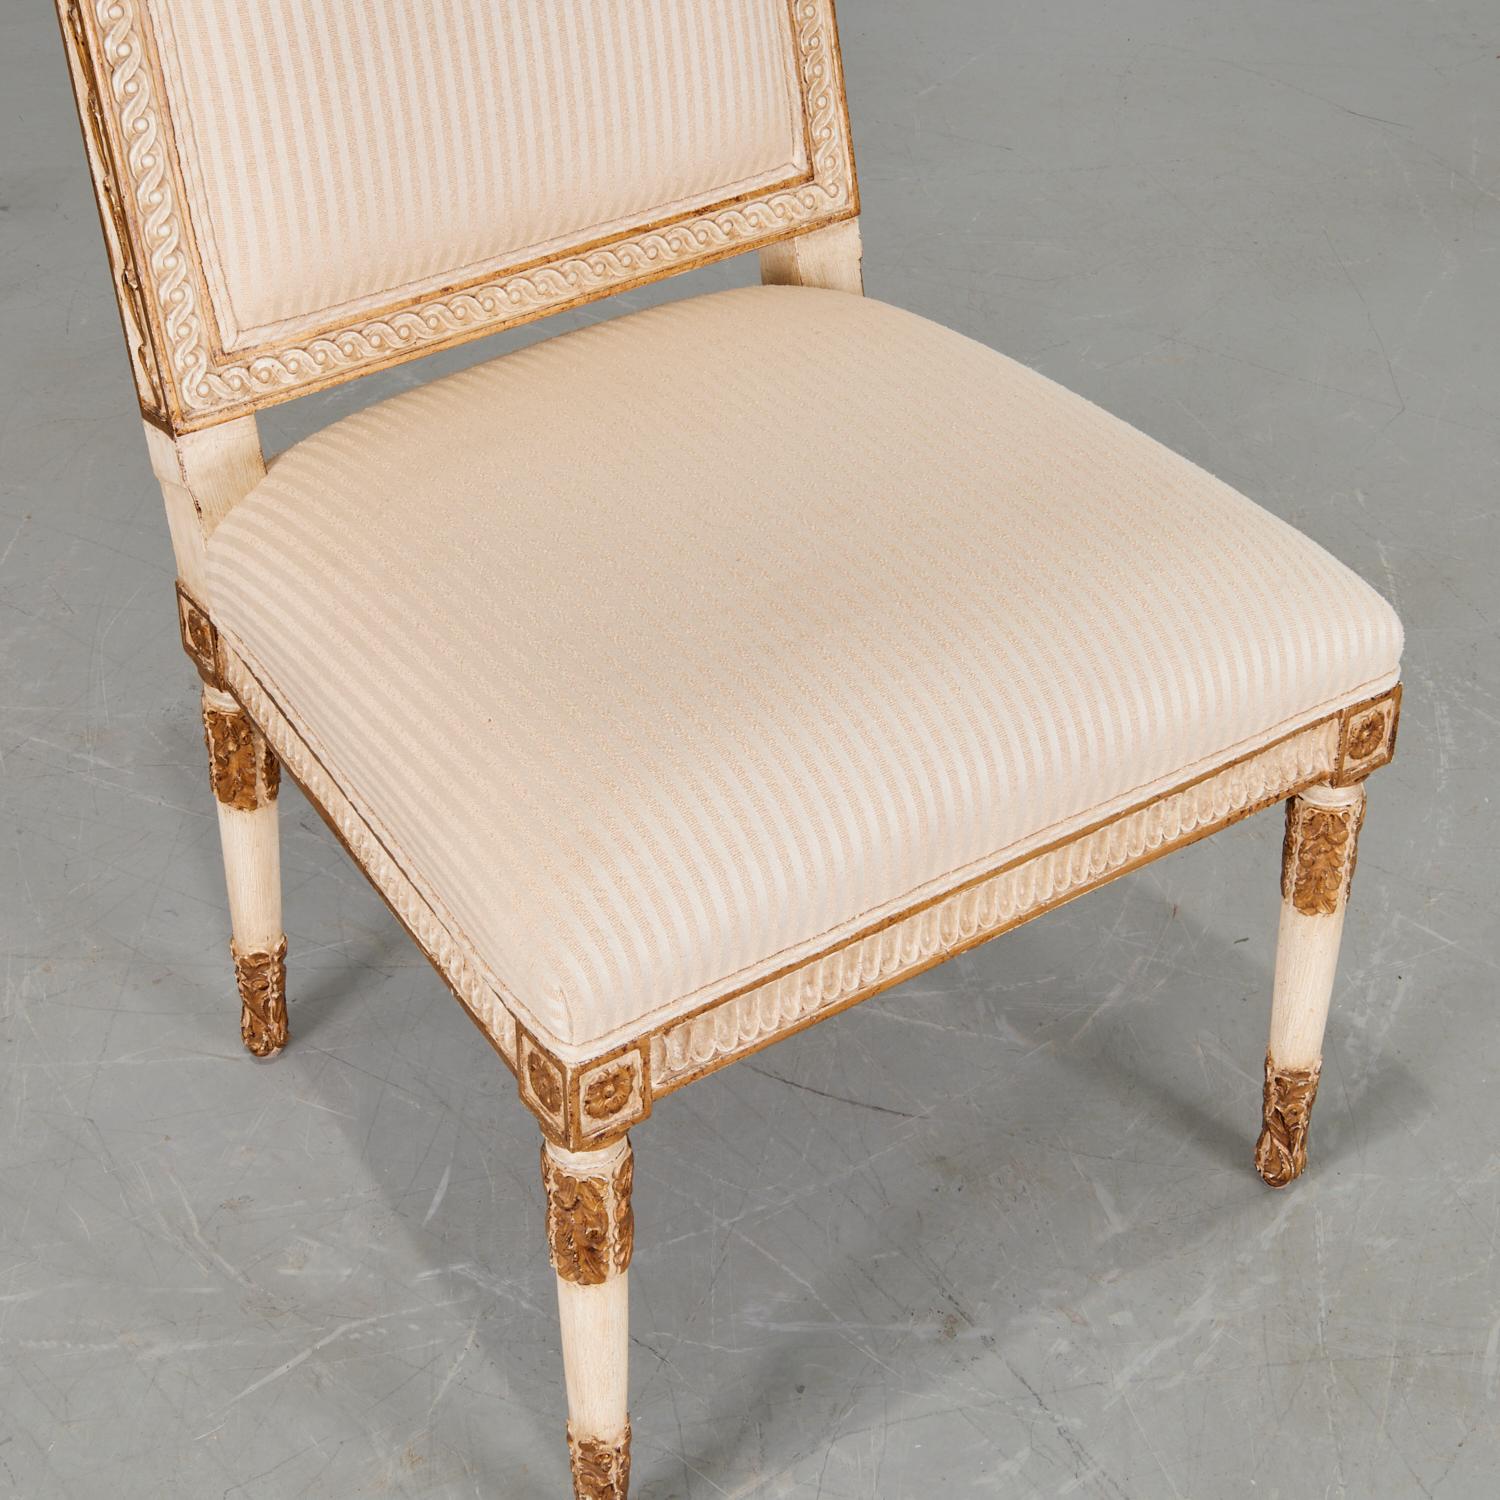 20th Italian neoclassical style slipper chair with a cream and gold painted carved frame, a cream striped upholstered seat and back.  Unmarked.

Dimensions:
37.75